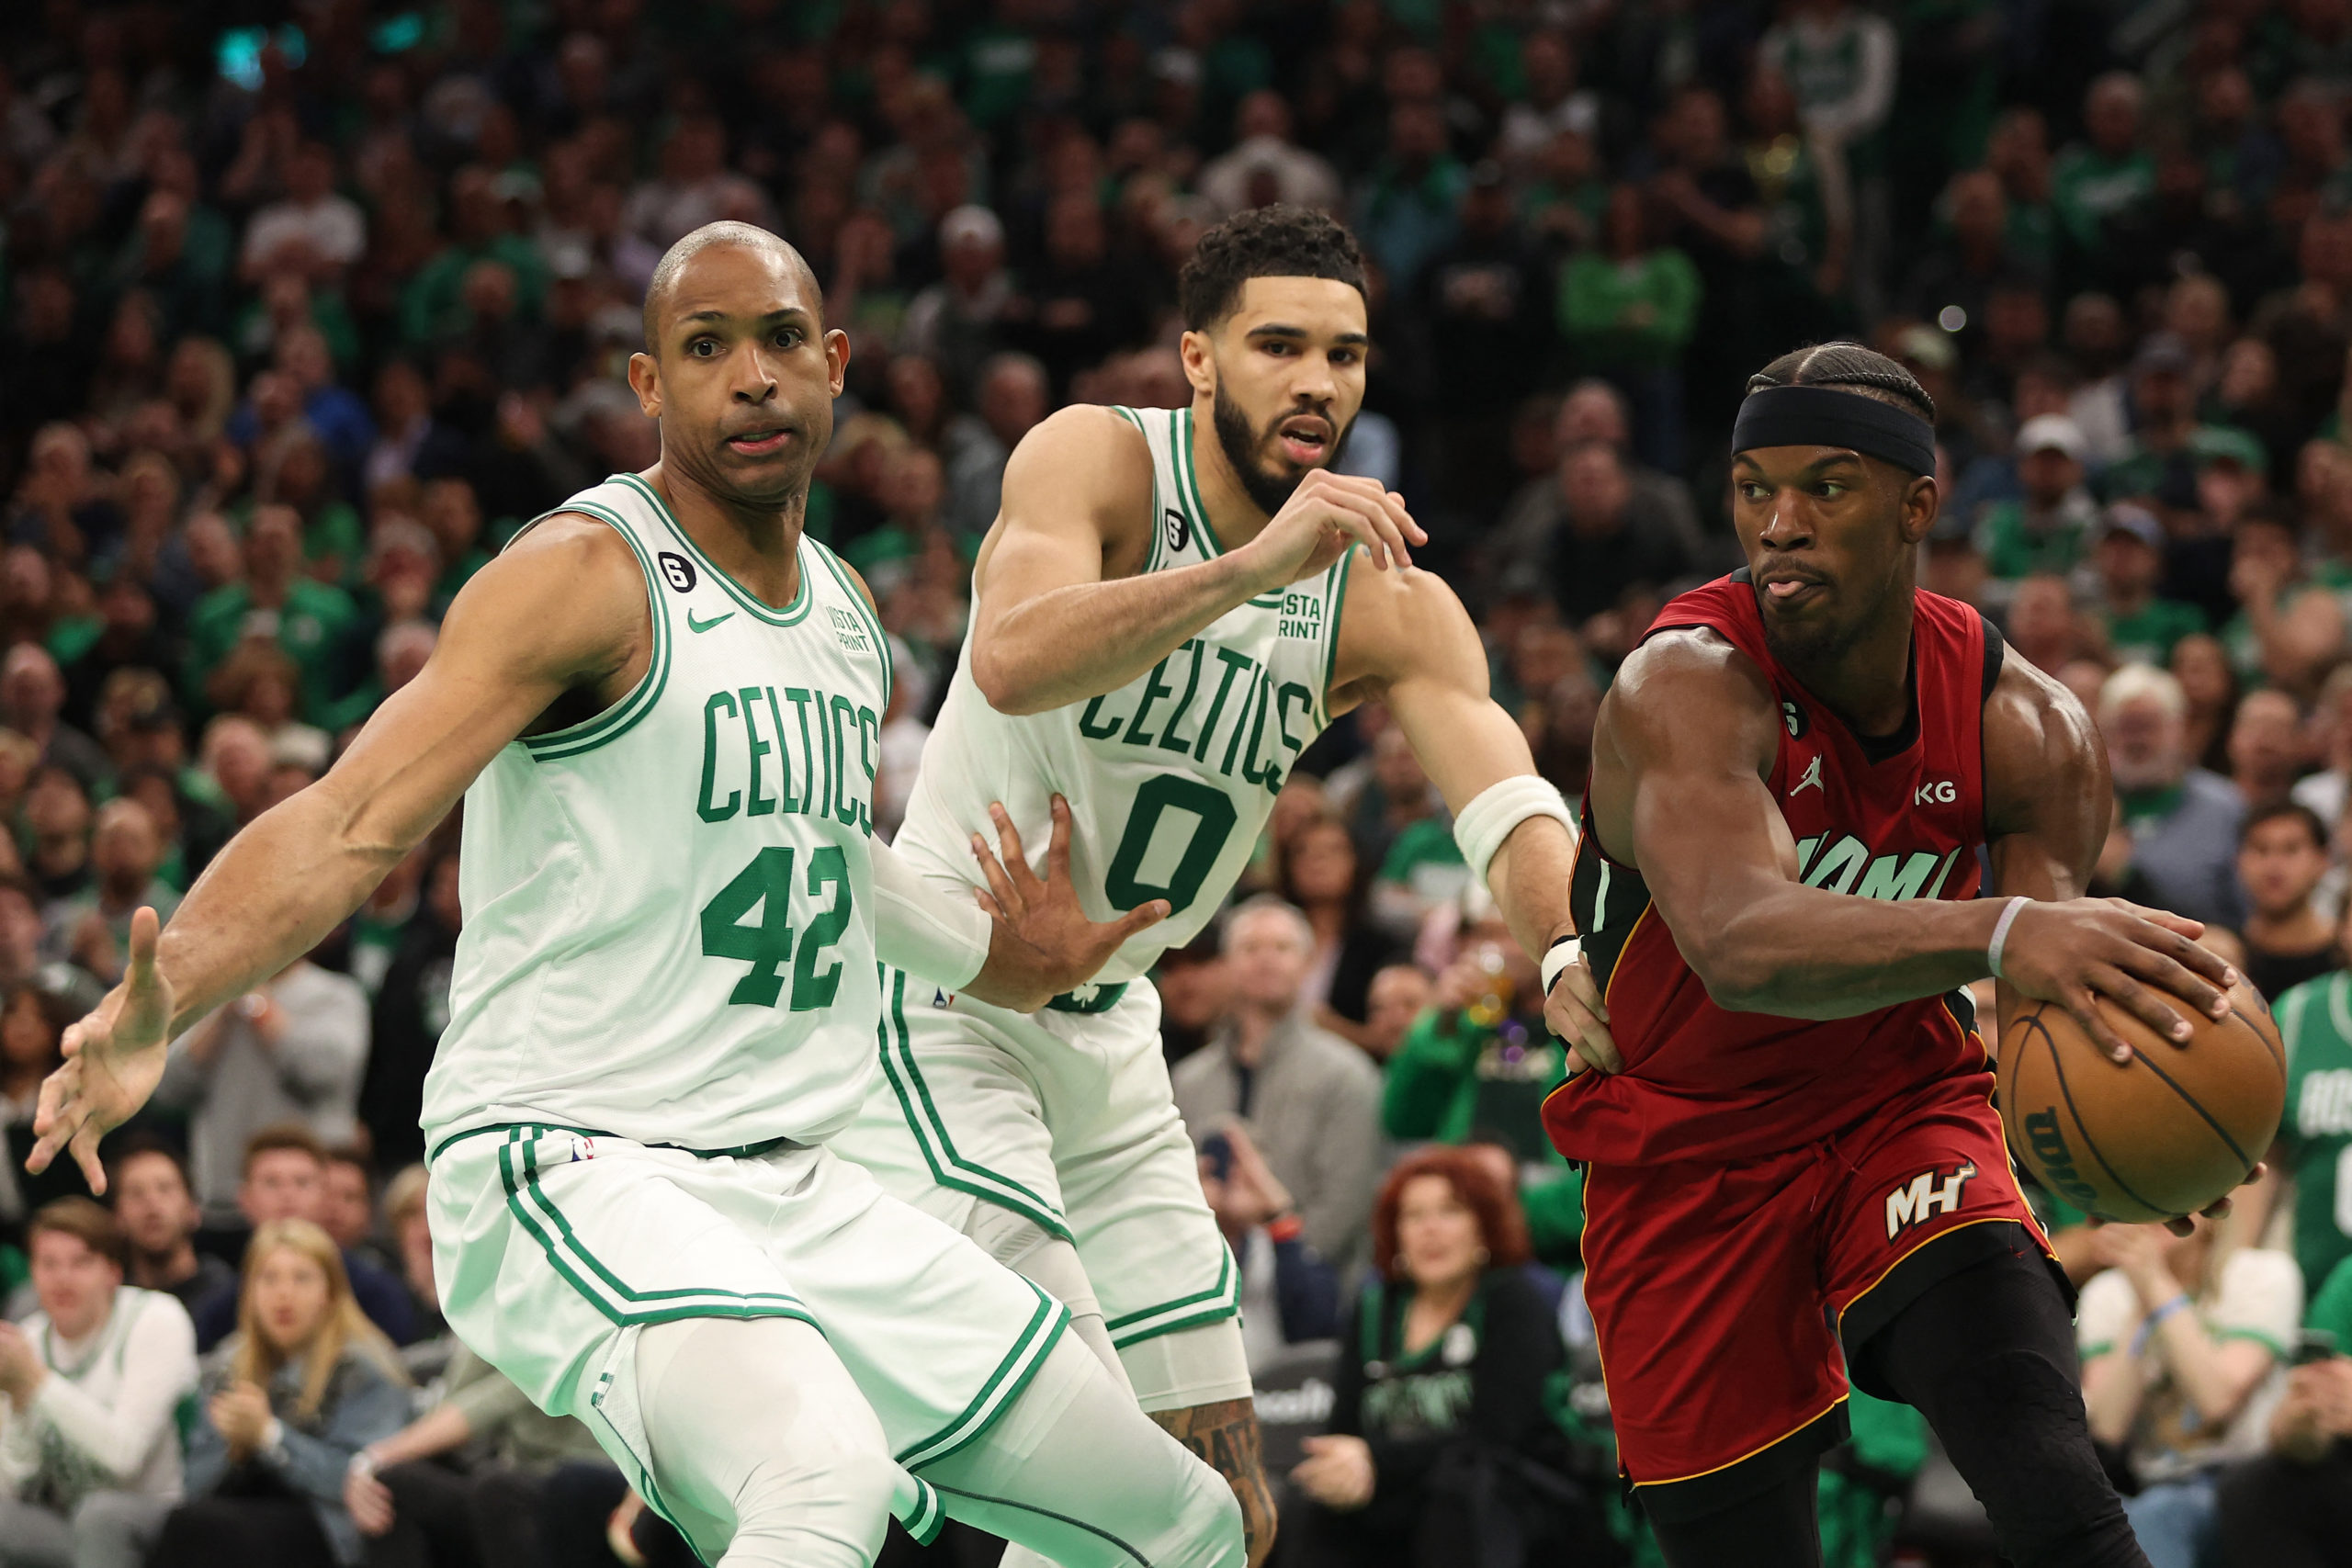 Butler scores 35, Heat rally to beat Celtics 123-116 in East